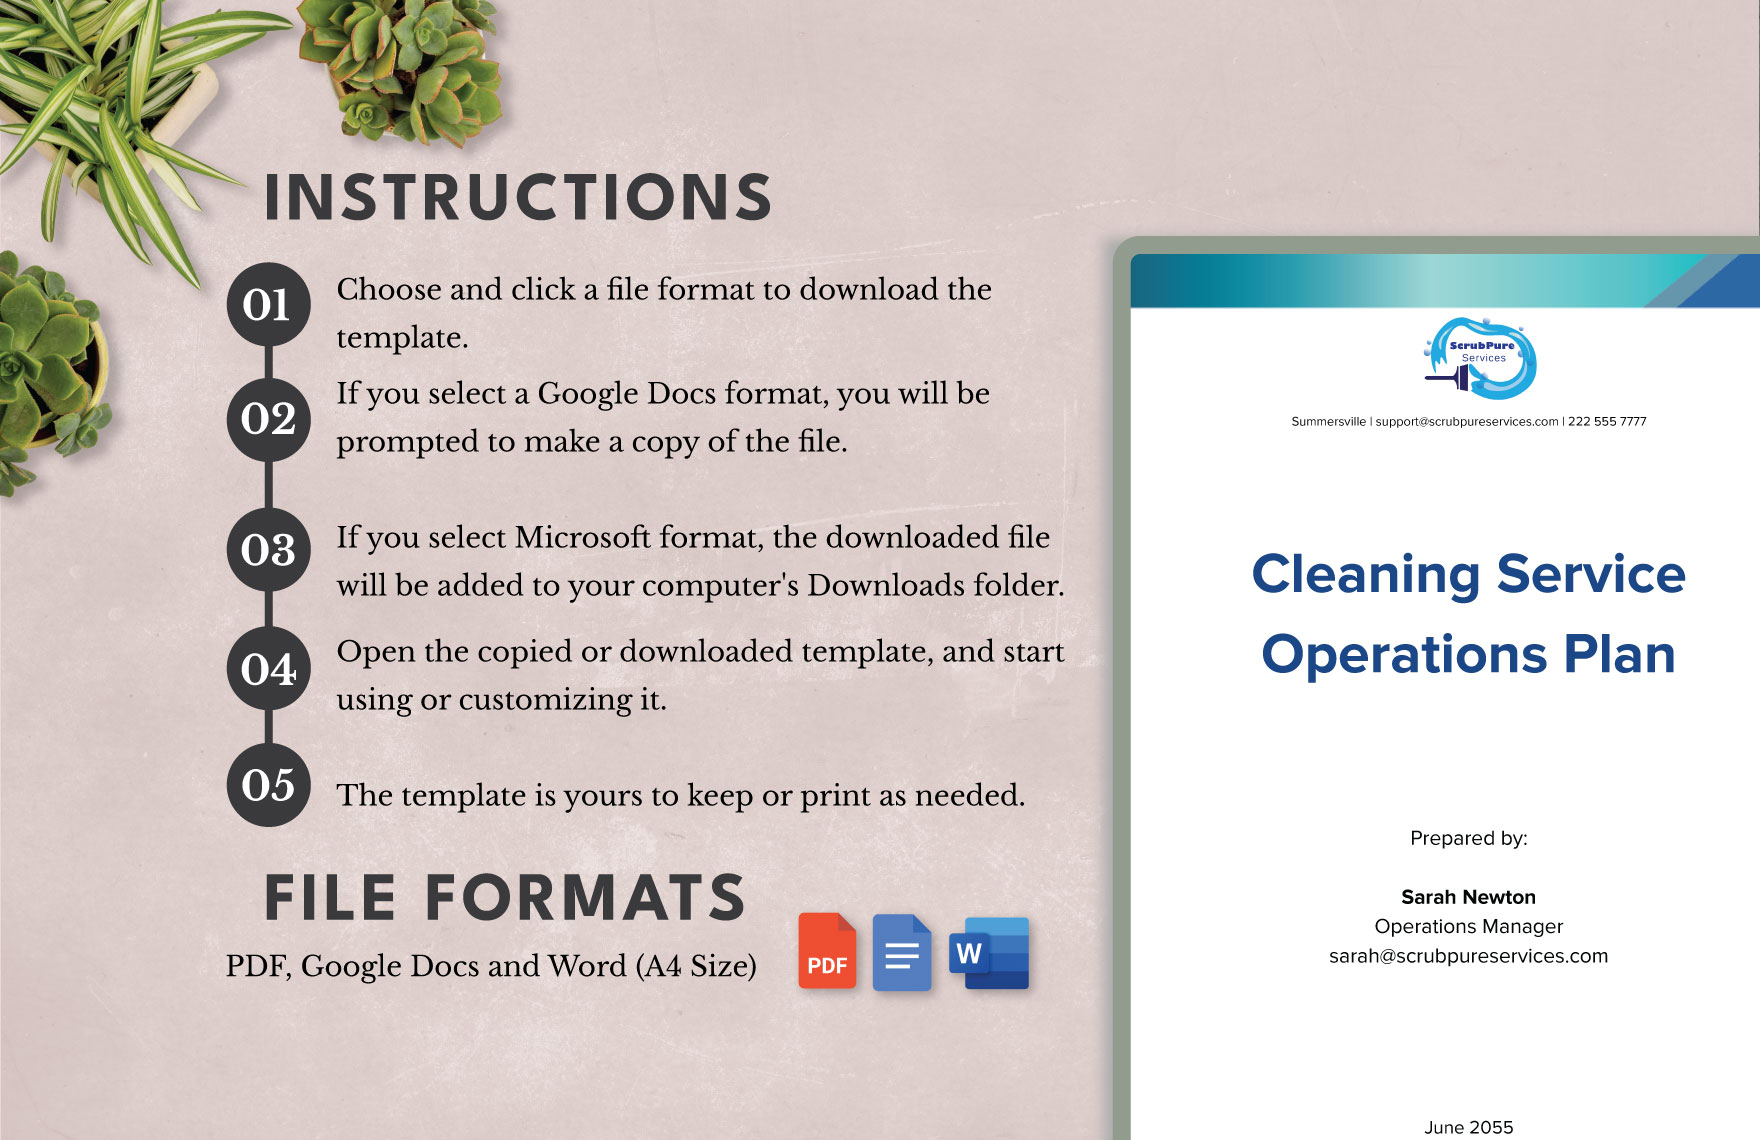 Sample Cleaning Service Operations Plan Template